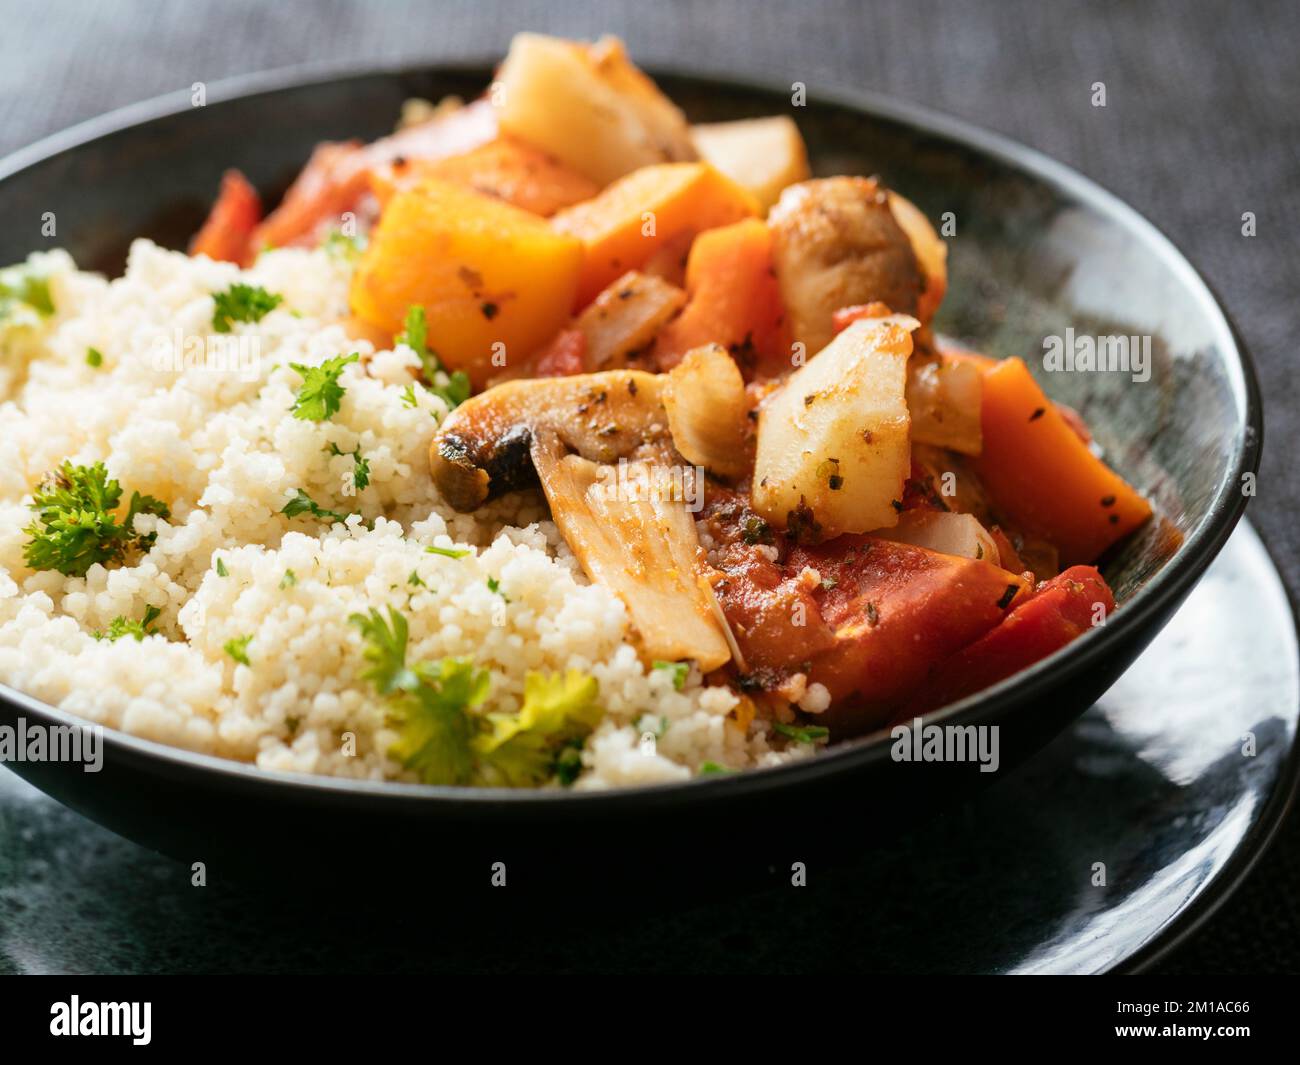 Bowl with a vegan vegetable ragu with herbed couscous Stock Photo